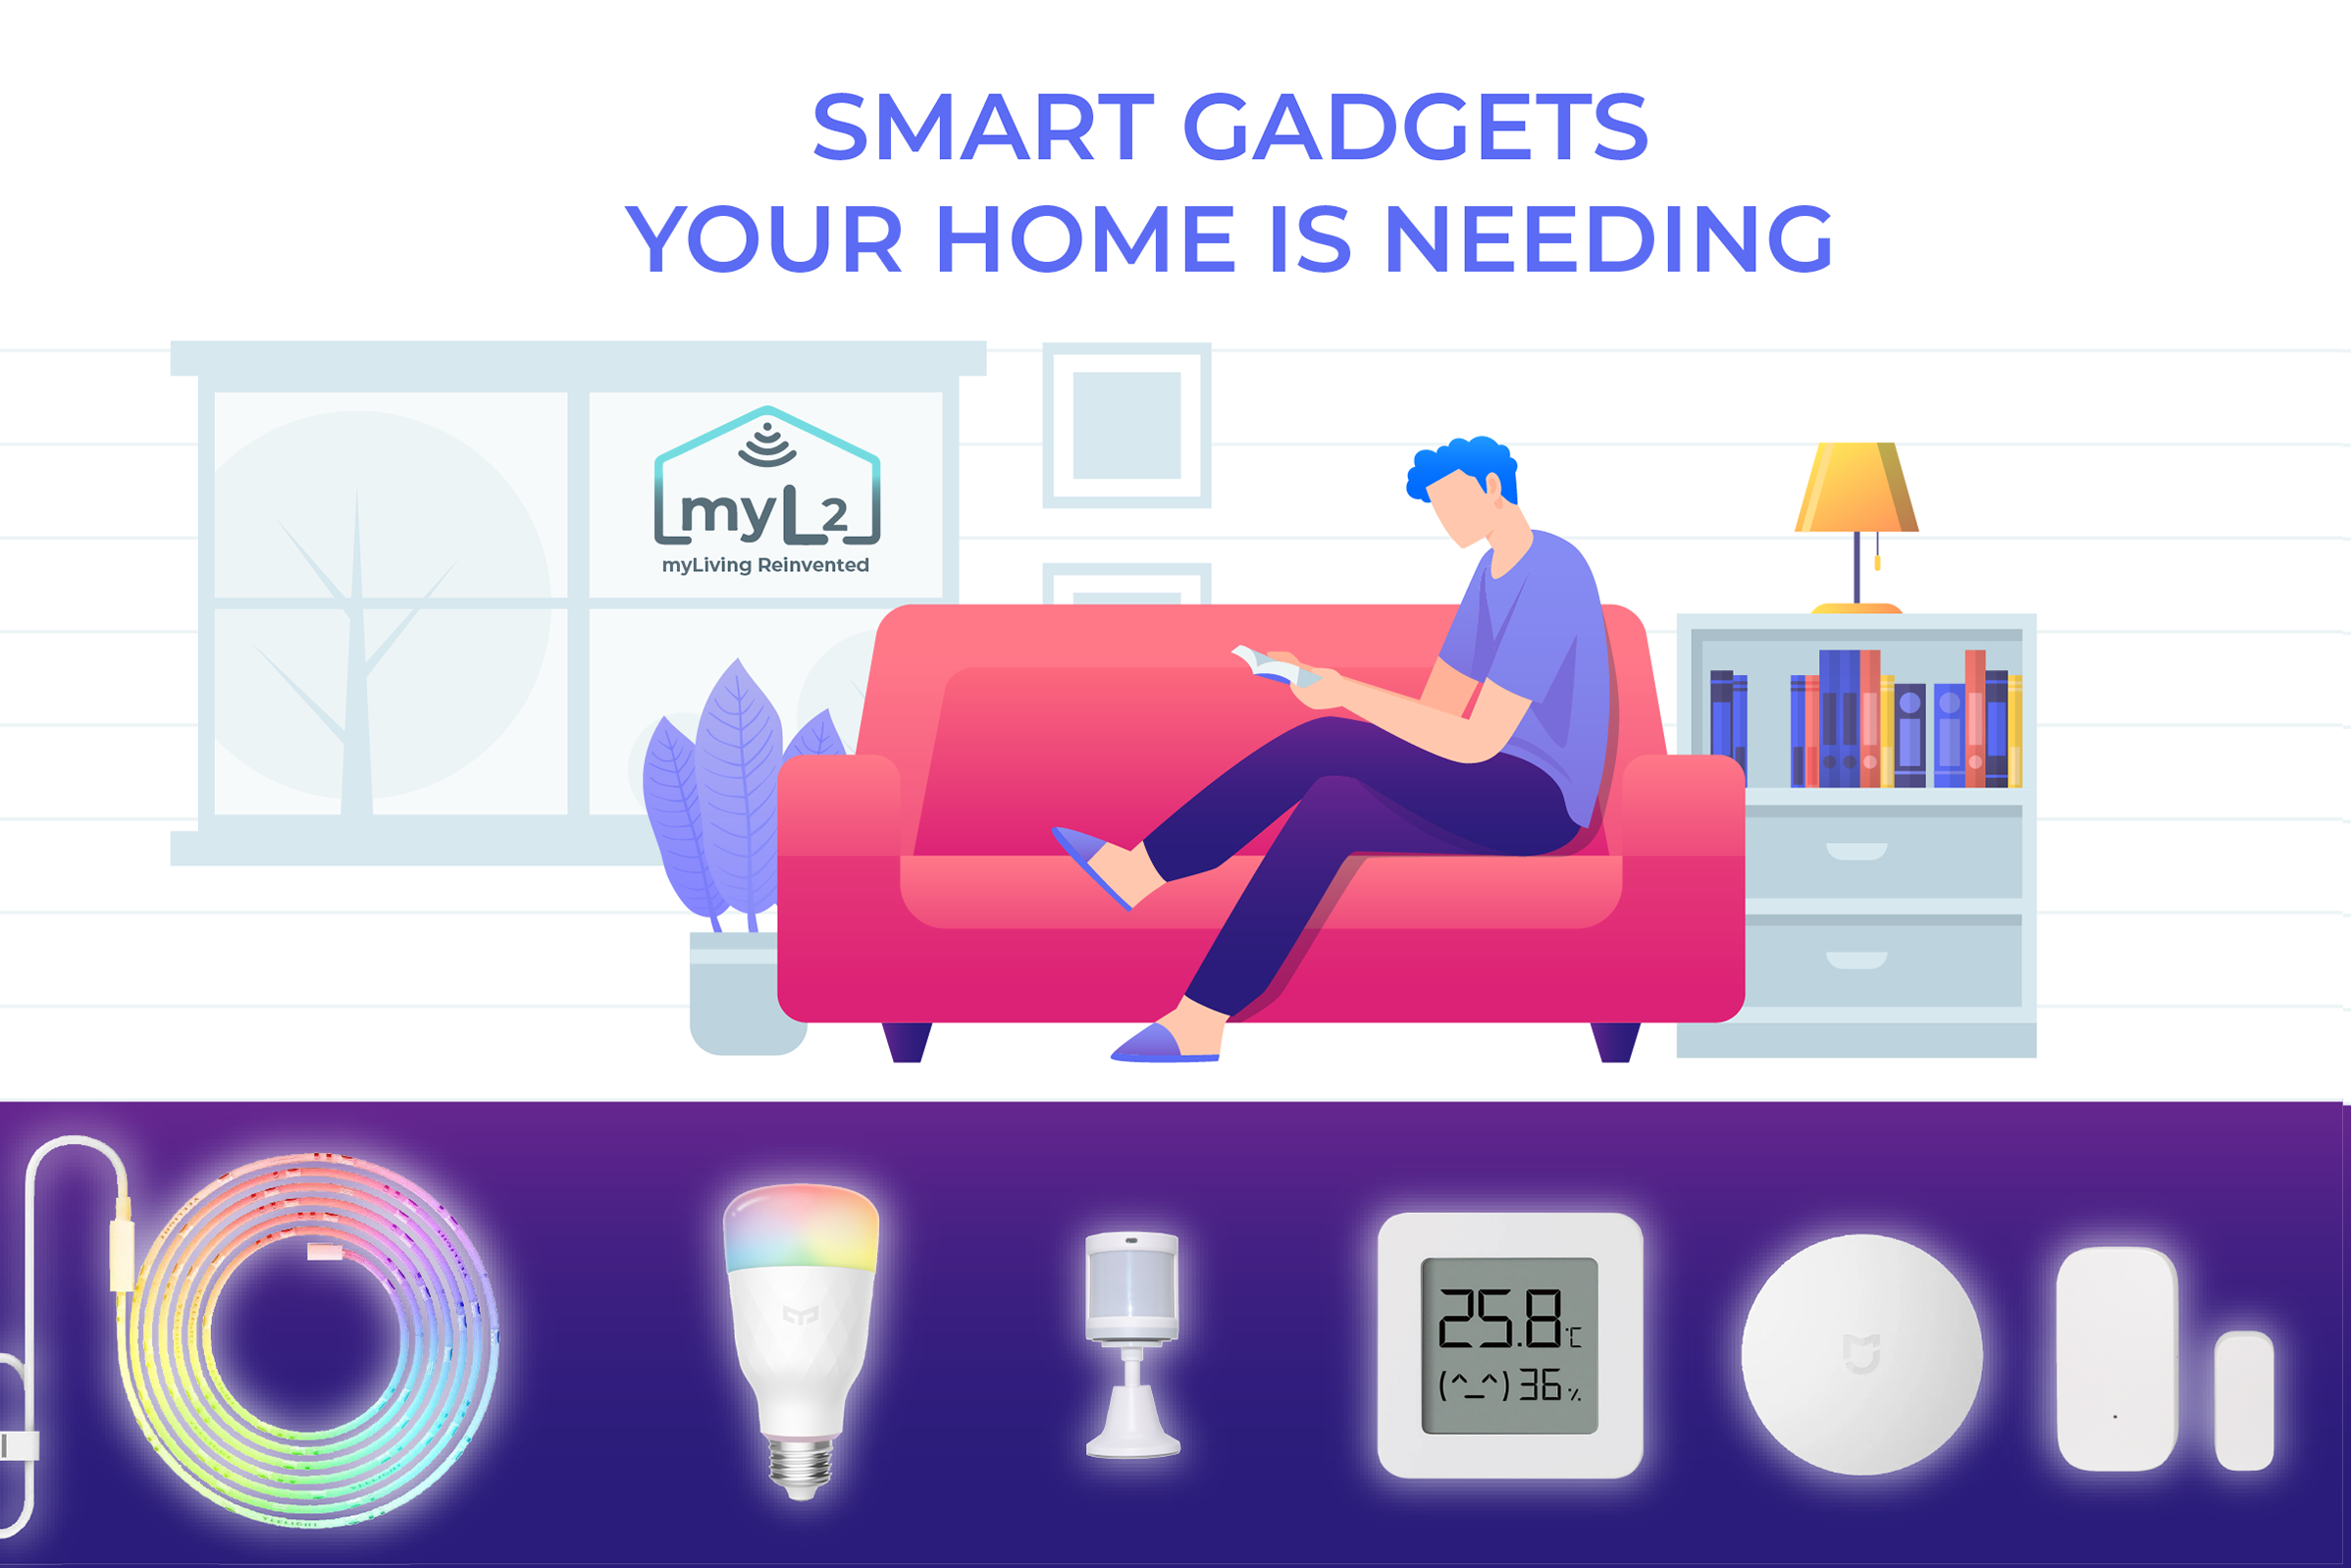 Smart Gadgets that your home needs